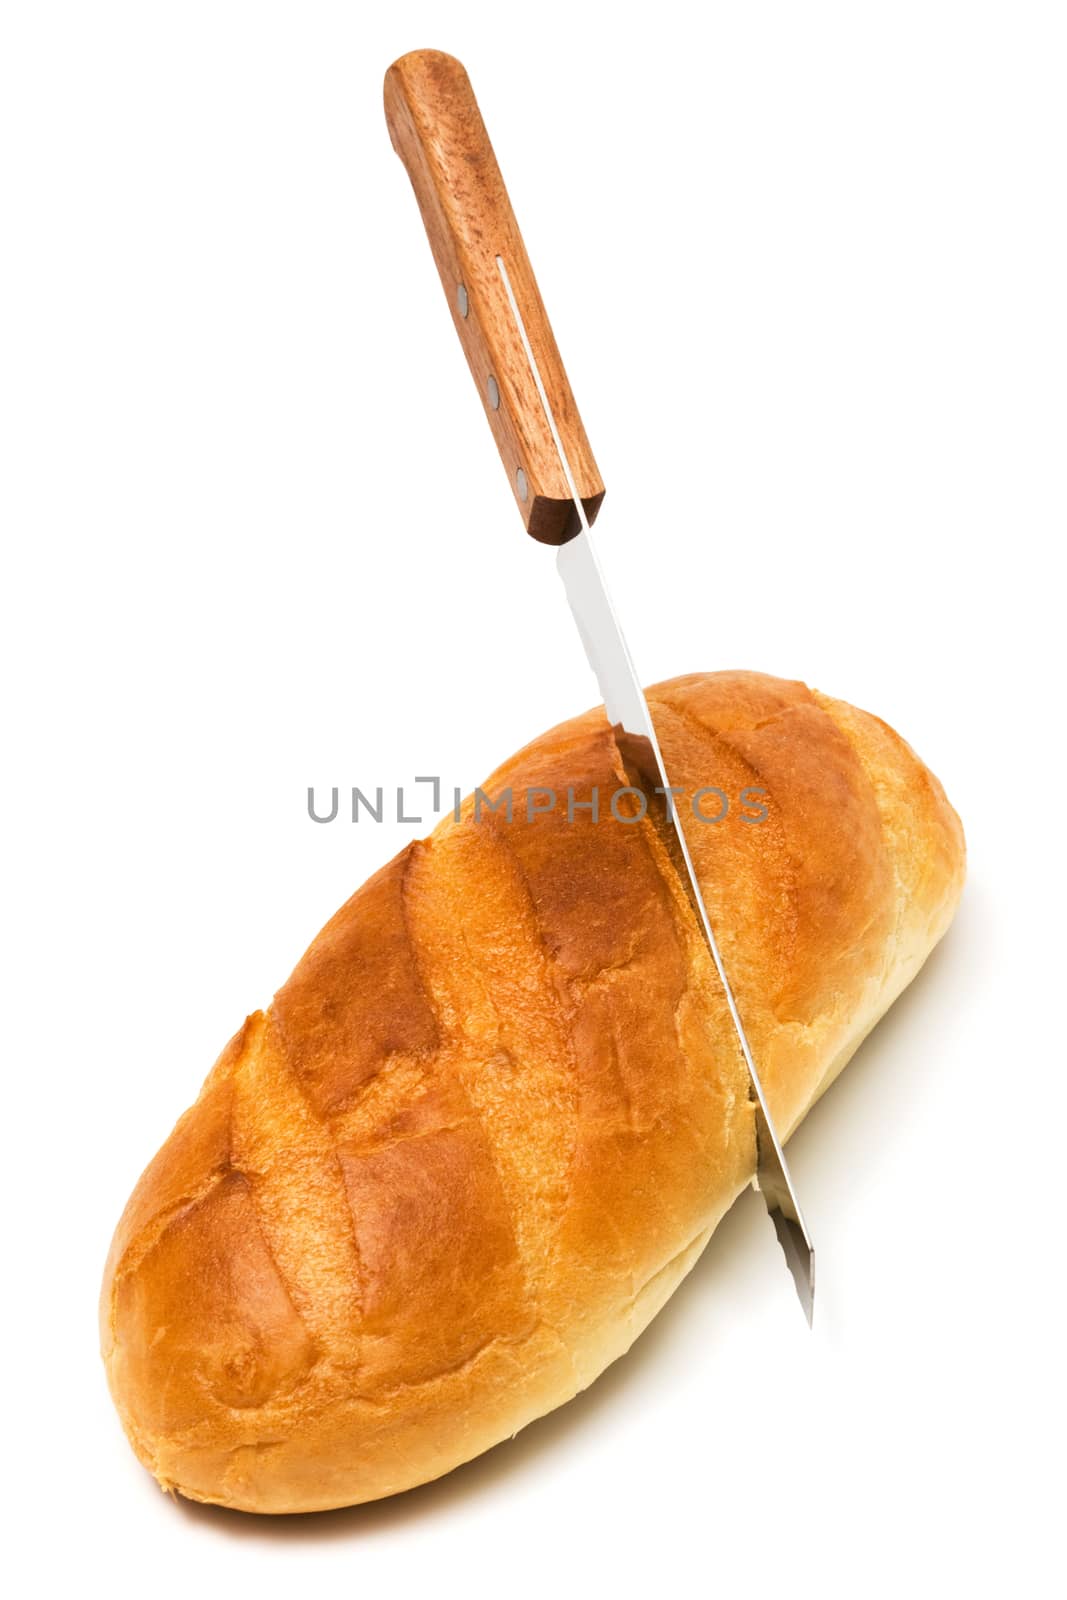 Fresh bread and knife by terex